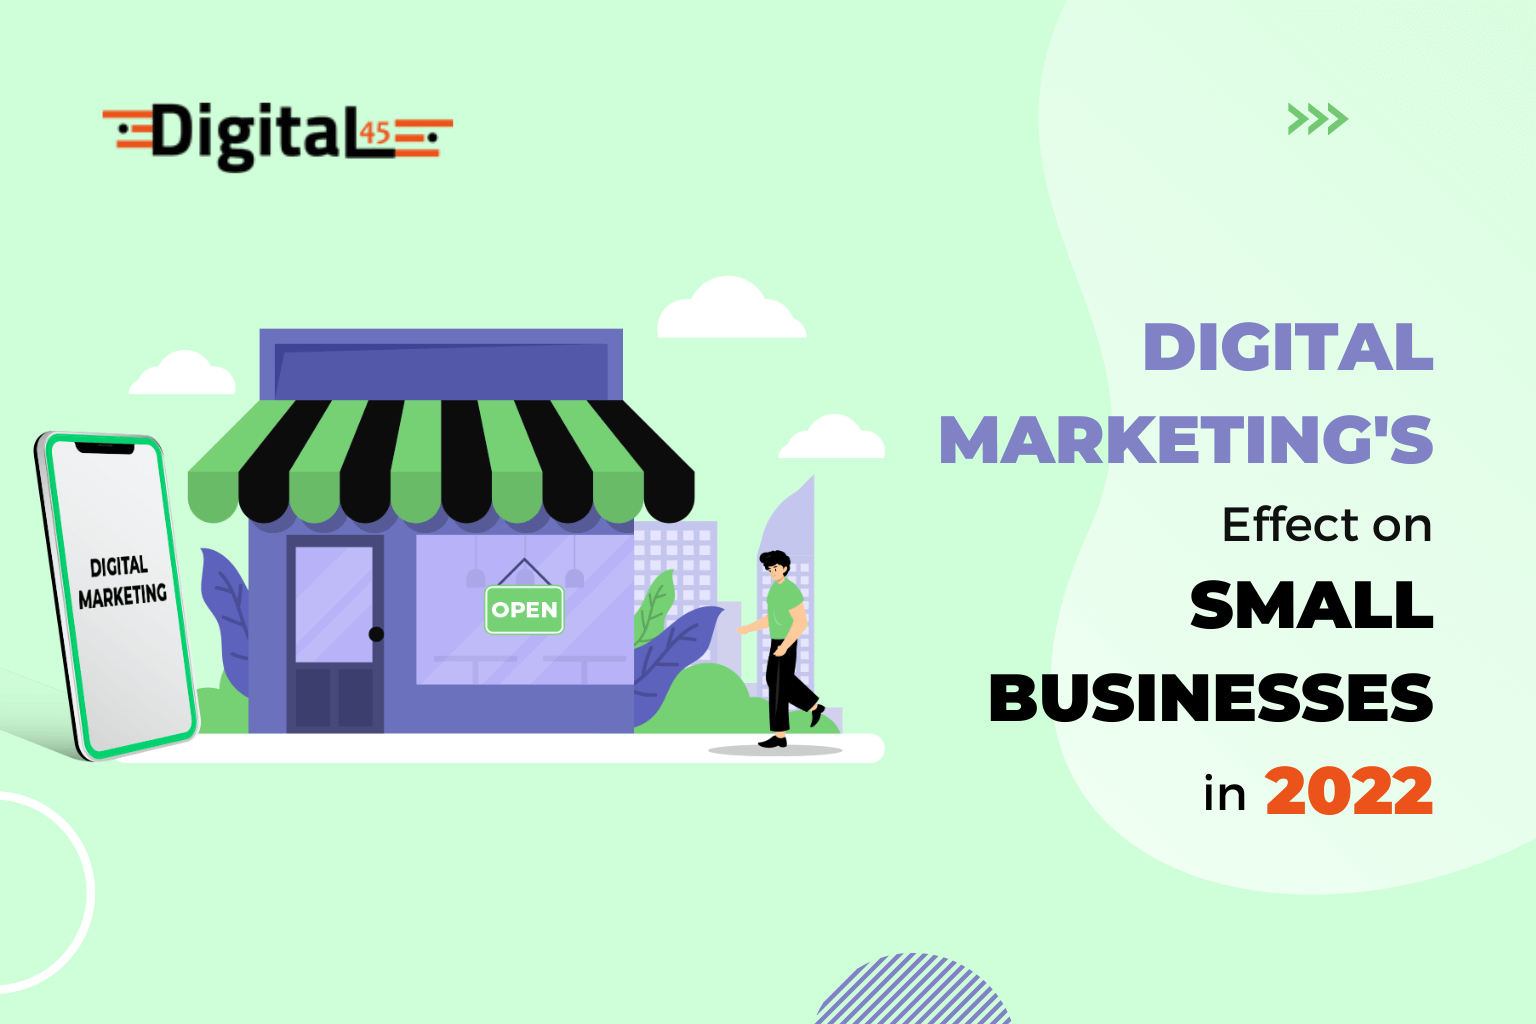 Digital Marketing's Effect on small businesses in 2022